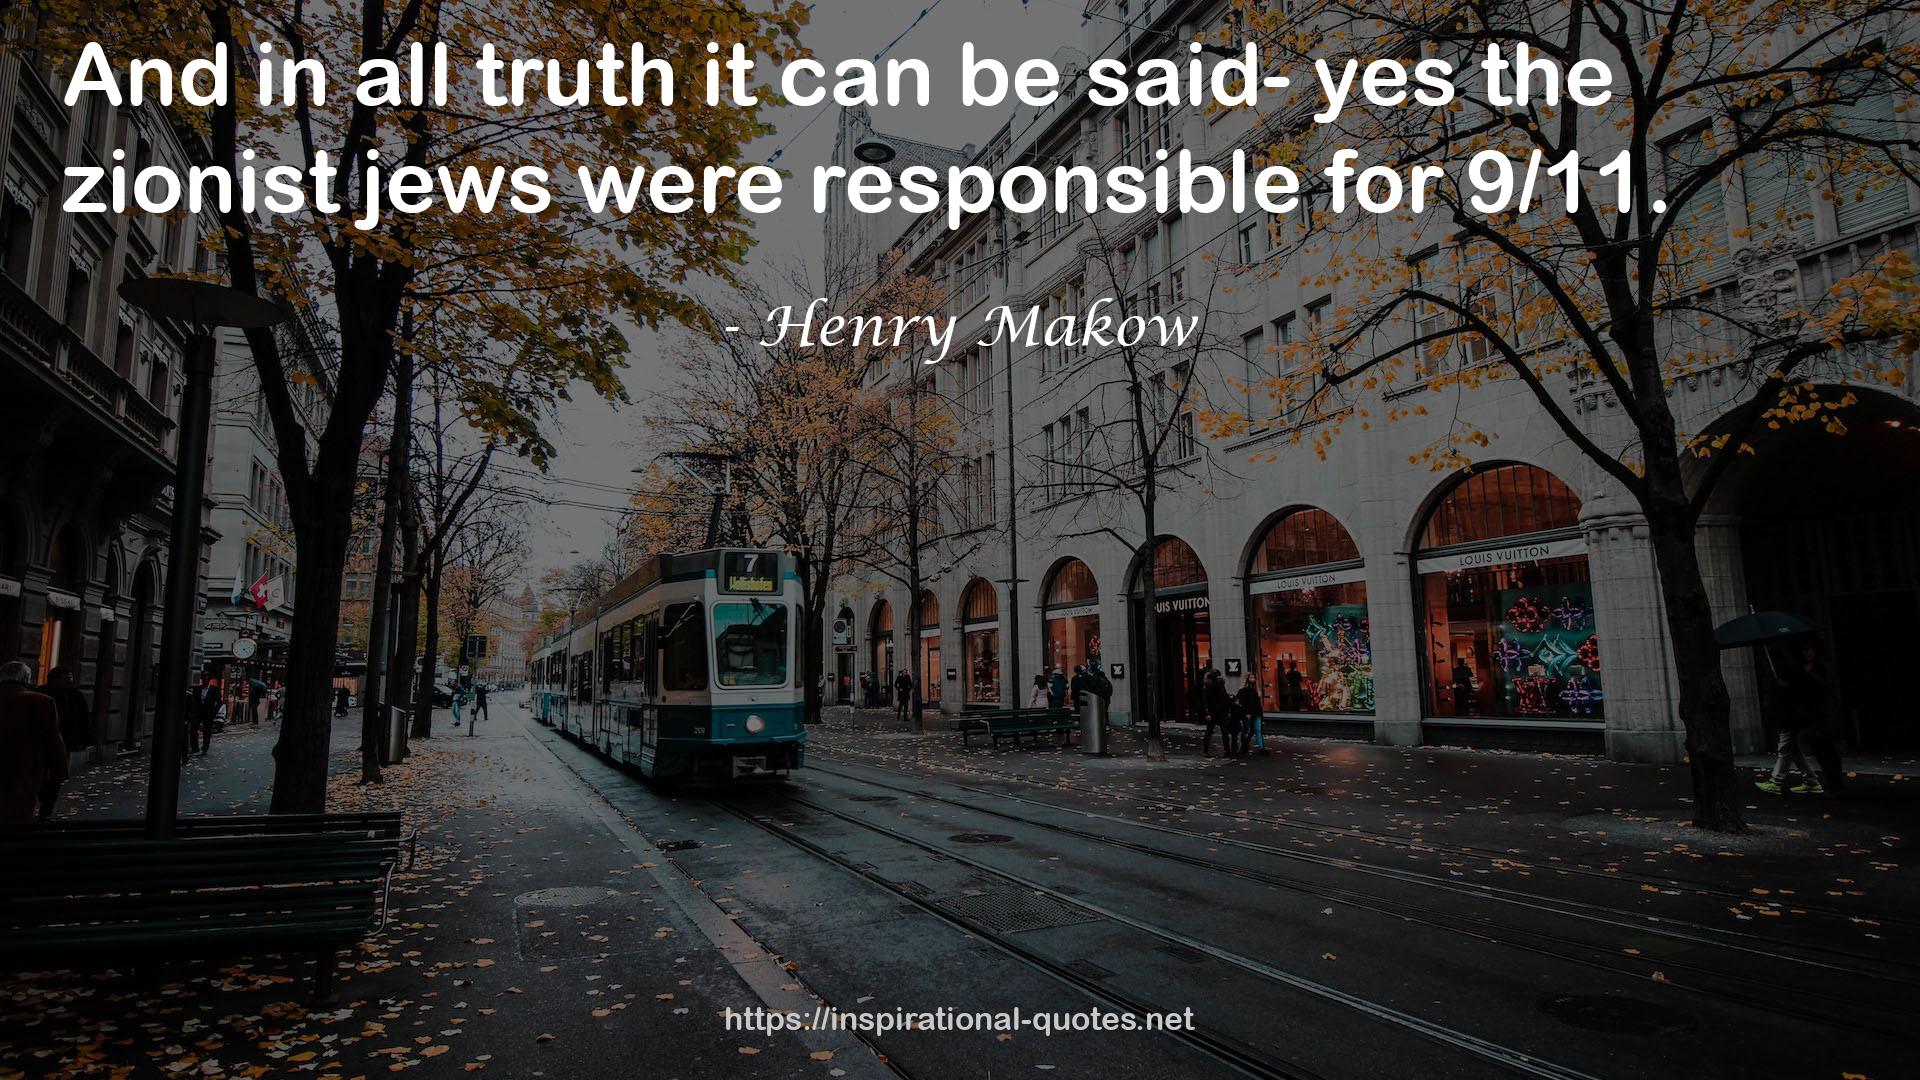 Henry Makow QUOTES